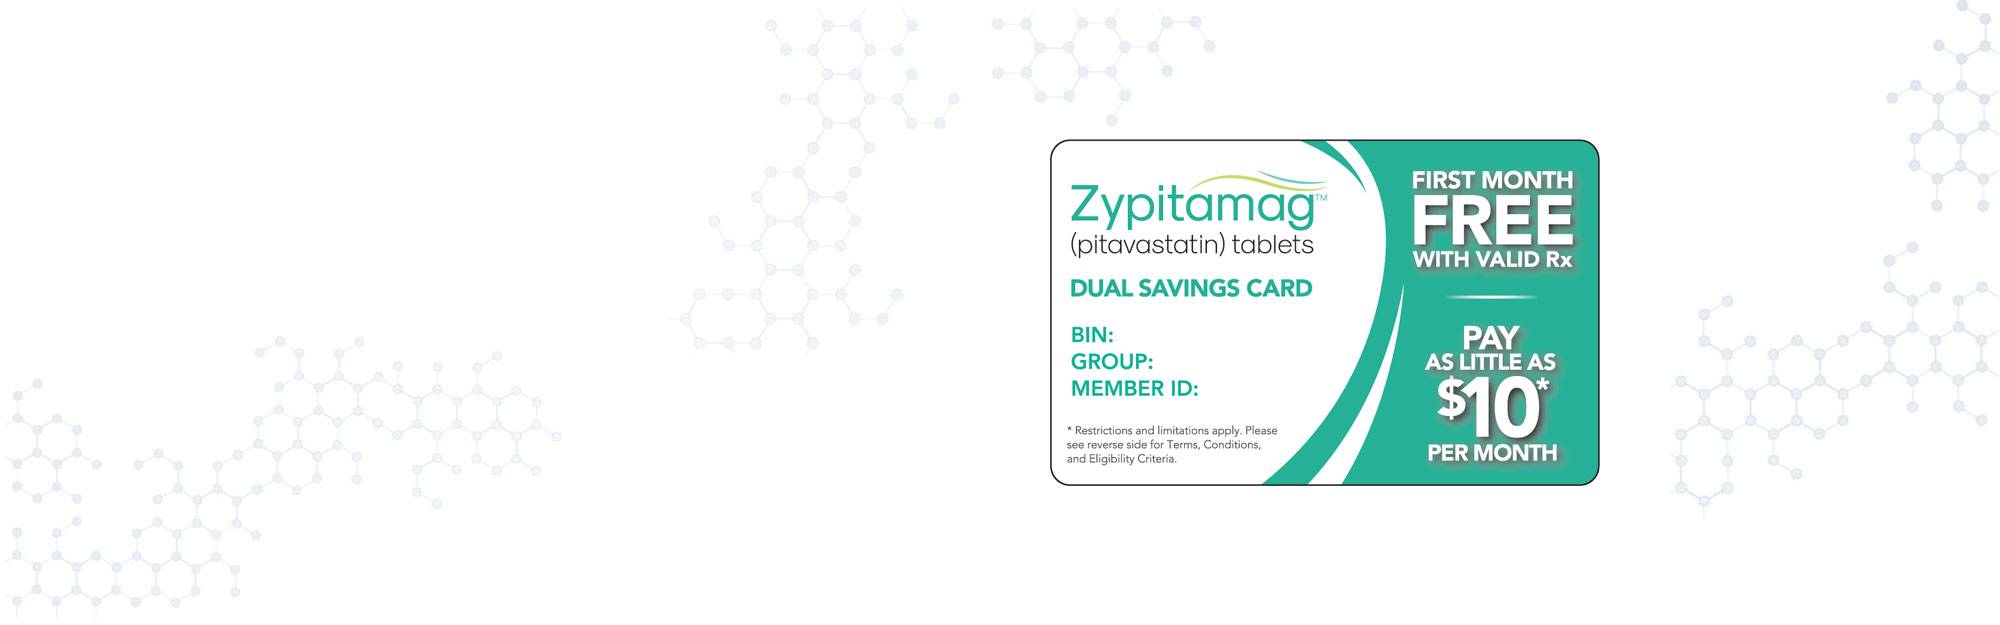 Accessing Zypitamag has never been easier for your patients!